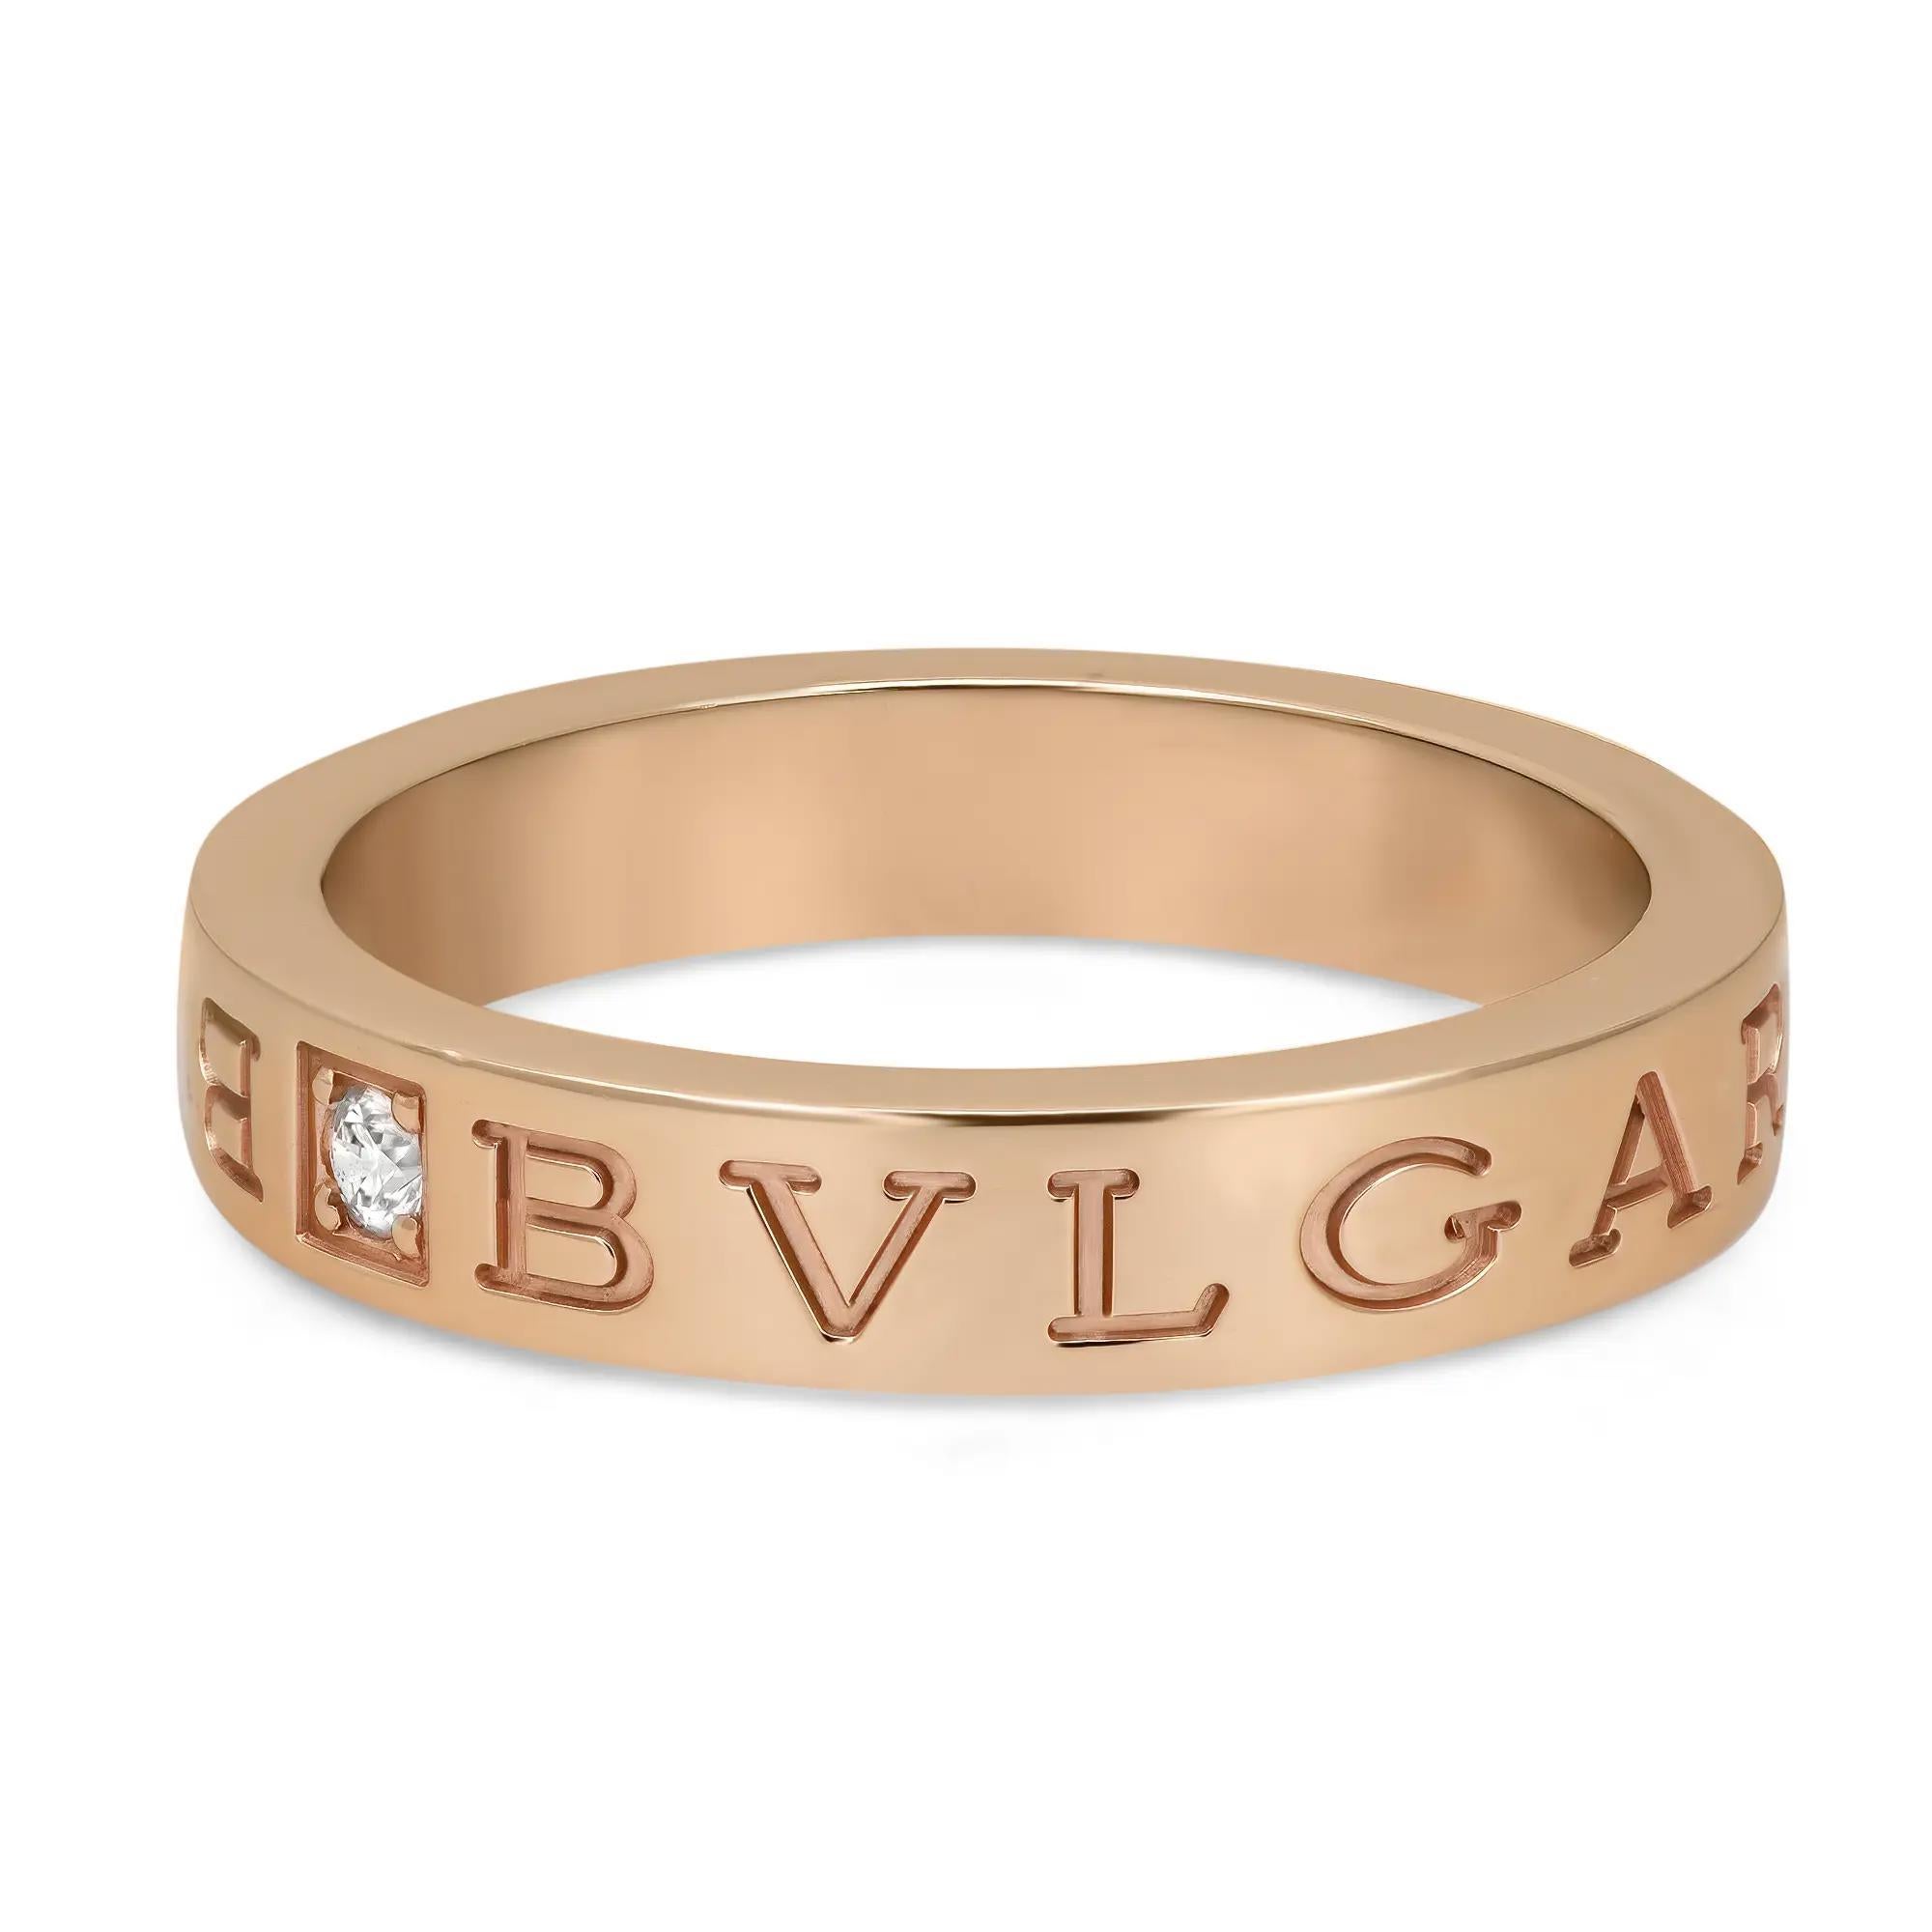 Bvlgari B.Zero1 Essential Diamond Band Ring featuring a center round cut diamond with engraved BVLGARI logo on both sides. Crafted in lustrous 18K rose gold. Ring size: 58 US 8.5. Width: 3.9mm. Diamond weight: 0.04 carat. Total weight: 7.51 grams.